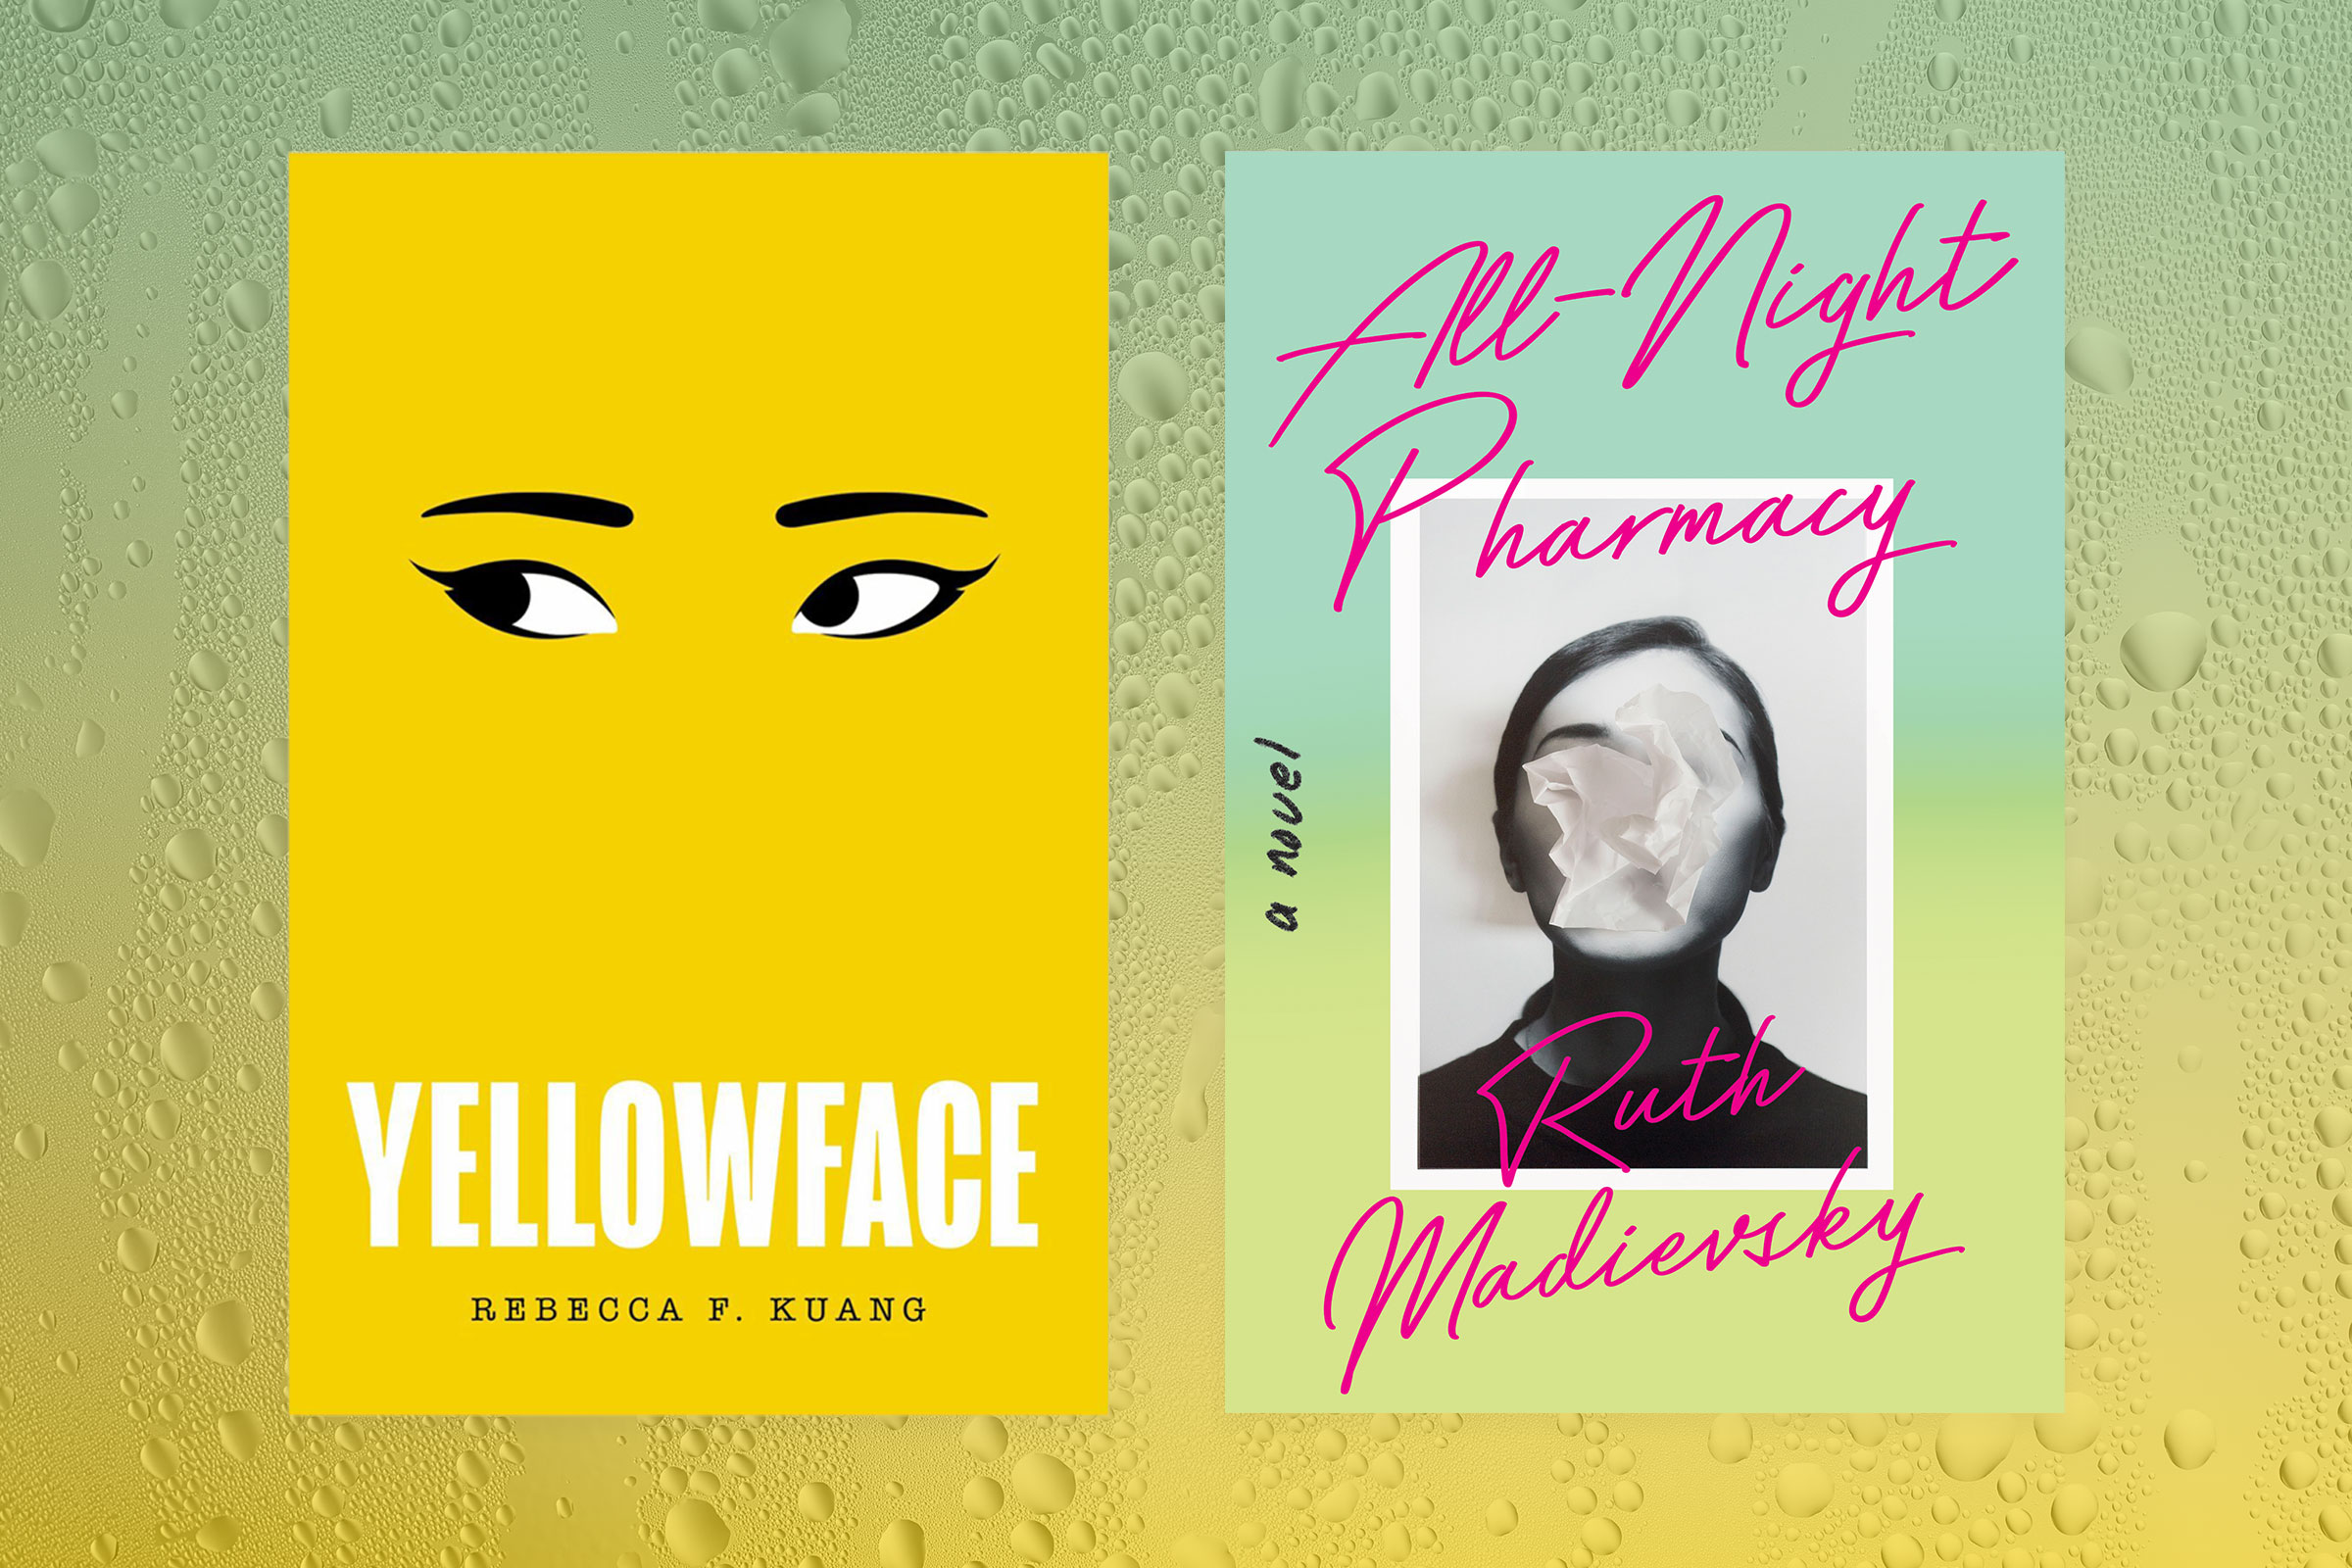 The book covers for Yellowface and All Night Pharmacy side by side on a background that looks like condensation